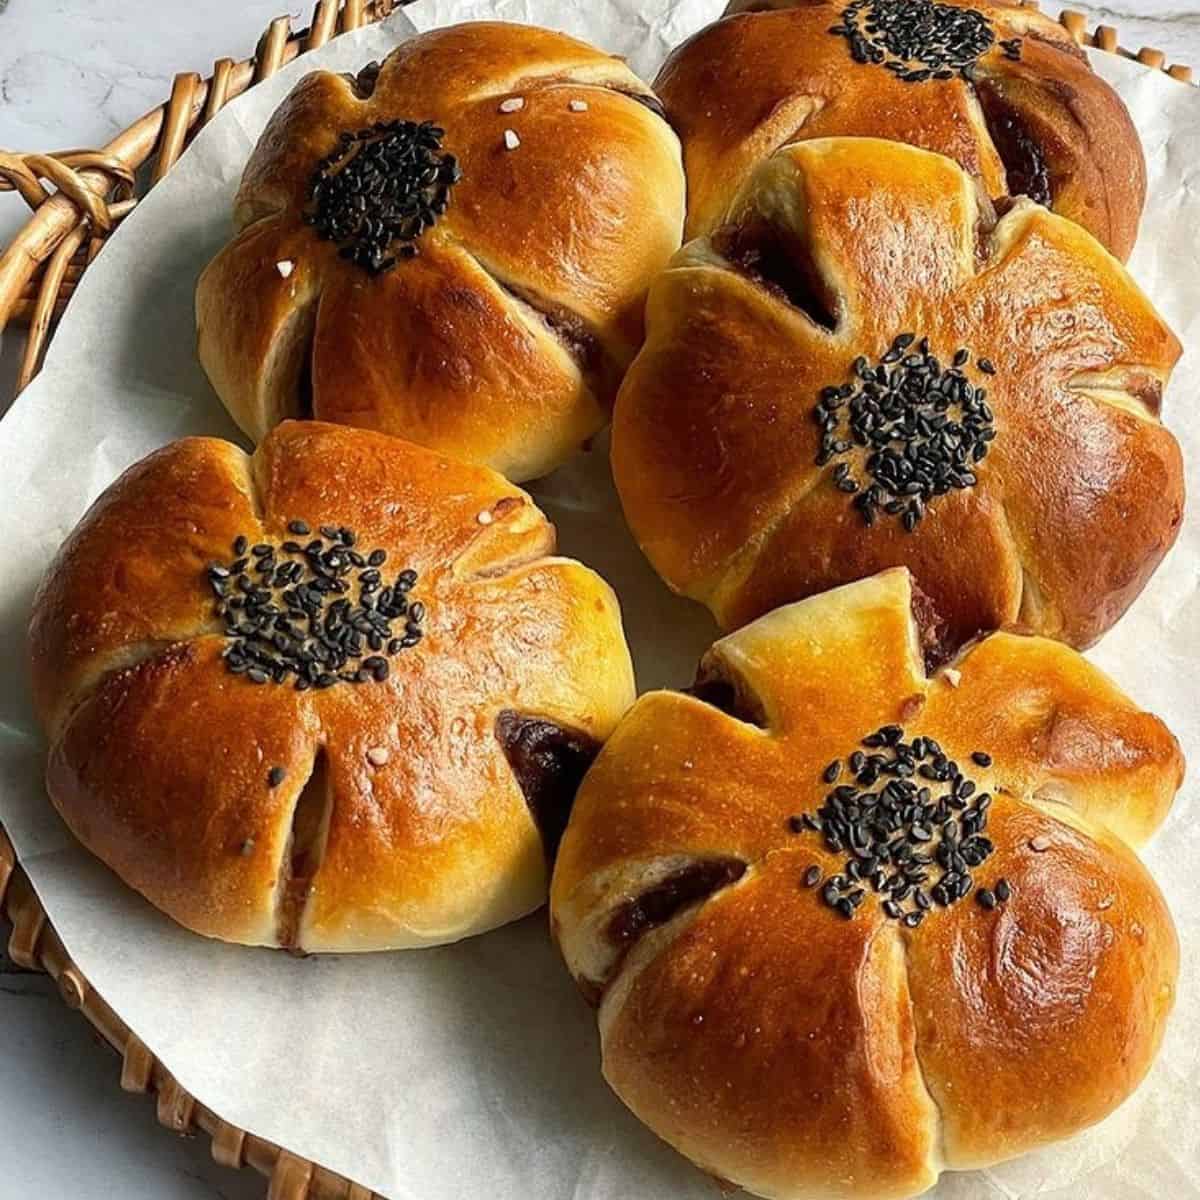 Japanese sweet bread with sesame seeds